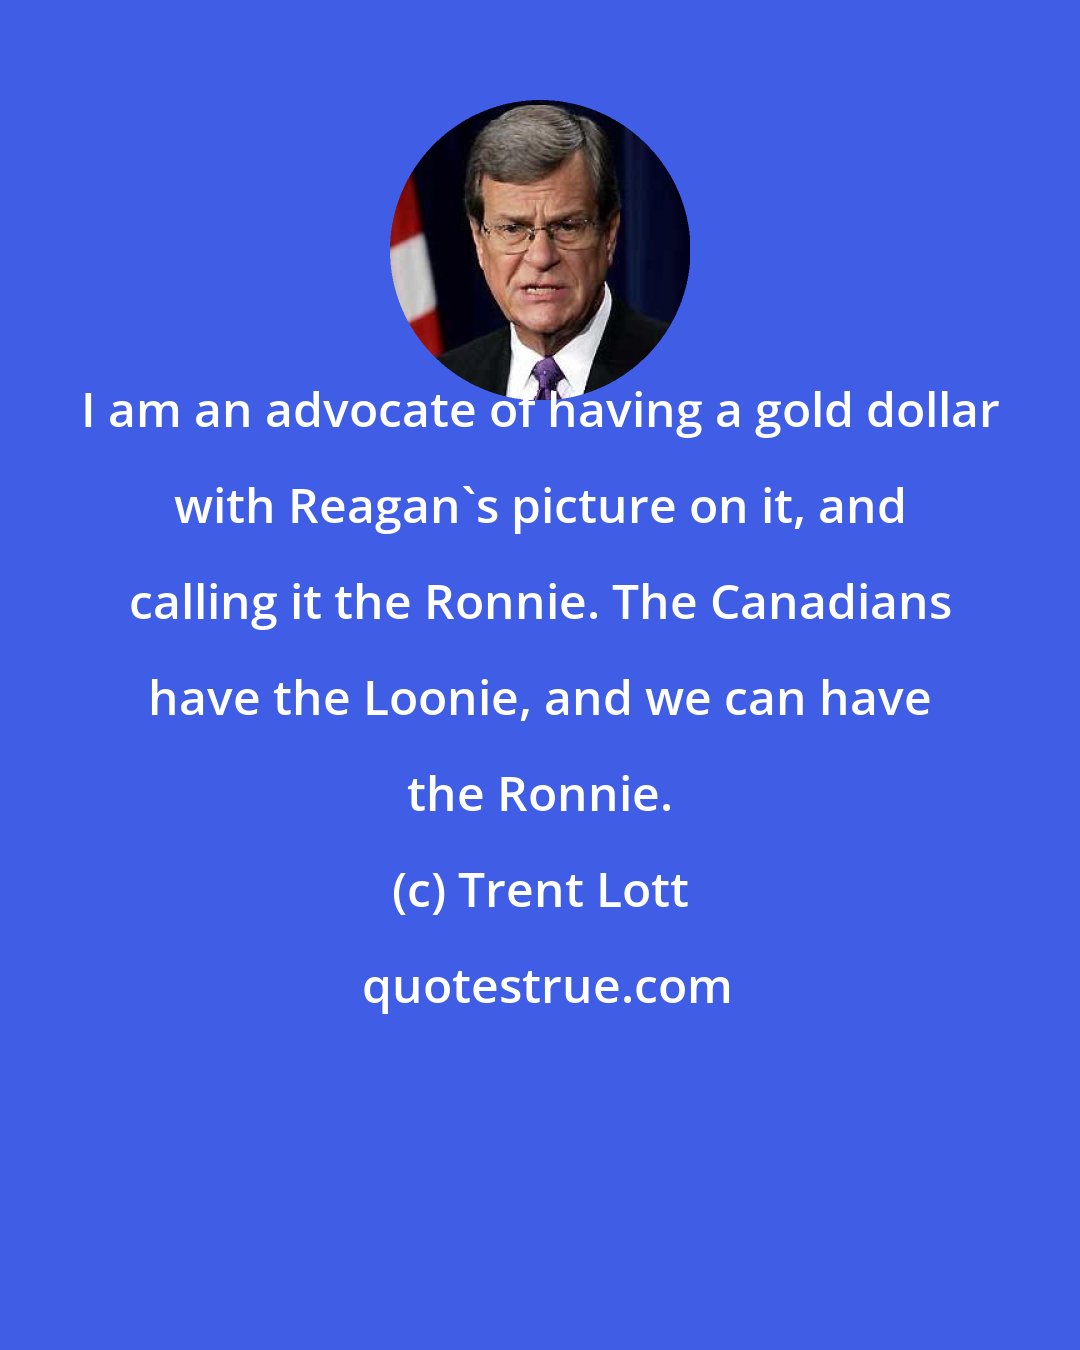 Trent Lott: I am an advocate of having a gold dollar with Reagan's picture on it, and calling it the Ronnie. The Canadians have the Loonie, and we can have the Ronnie.